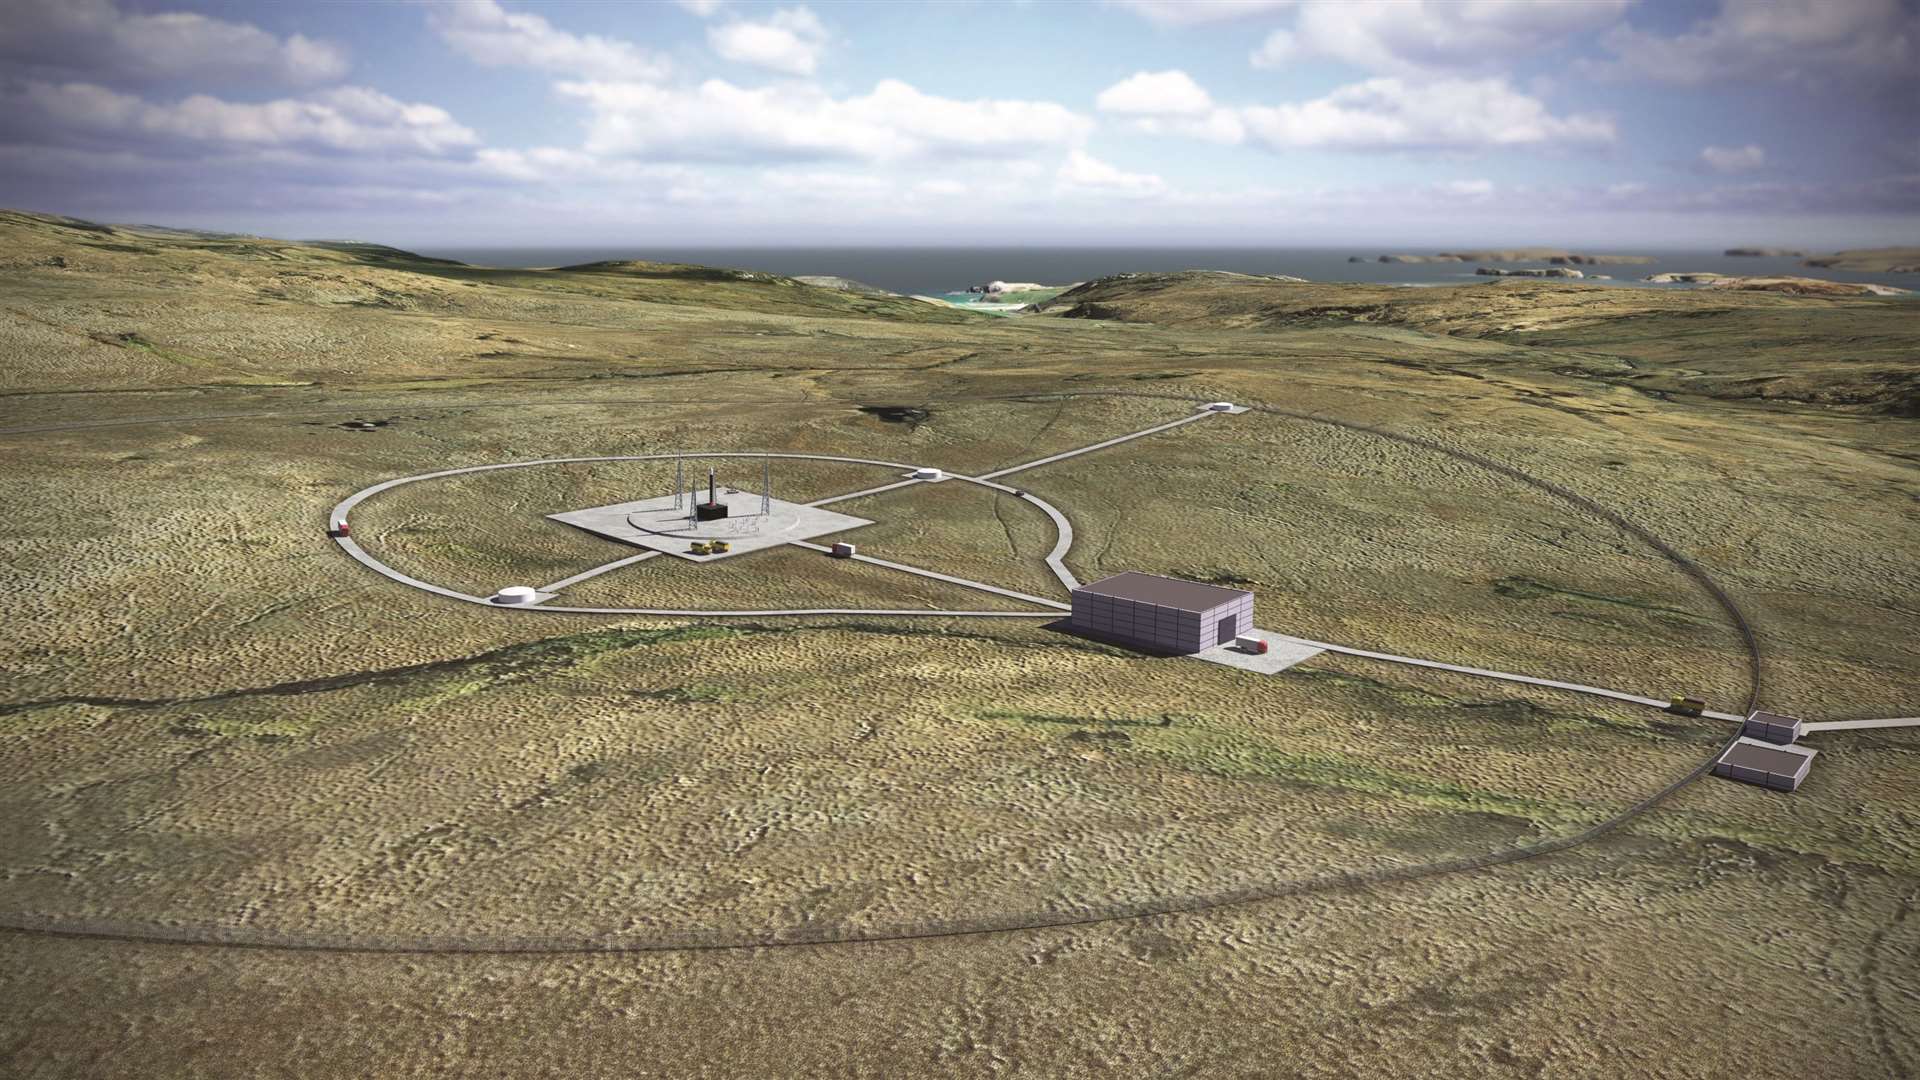 New opportunities include the proposed space hub at A'Mhoine in Sutherland.